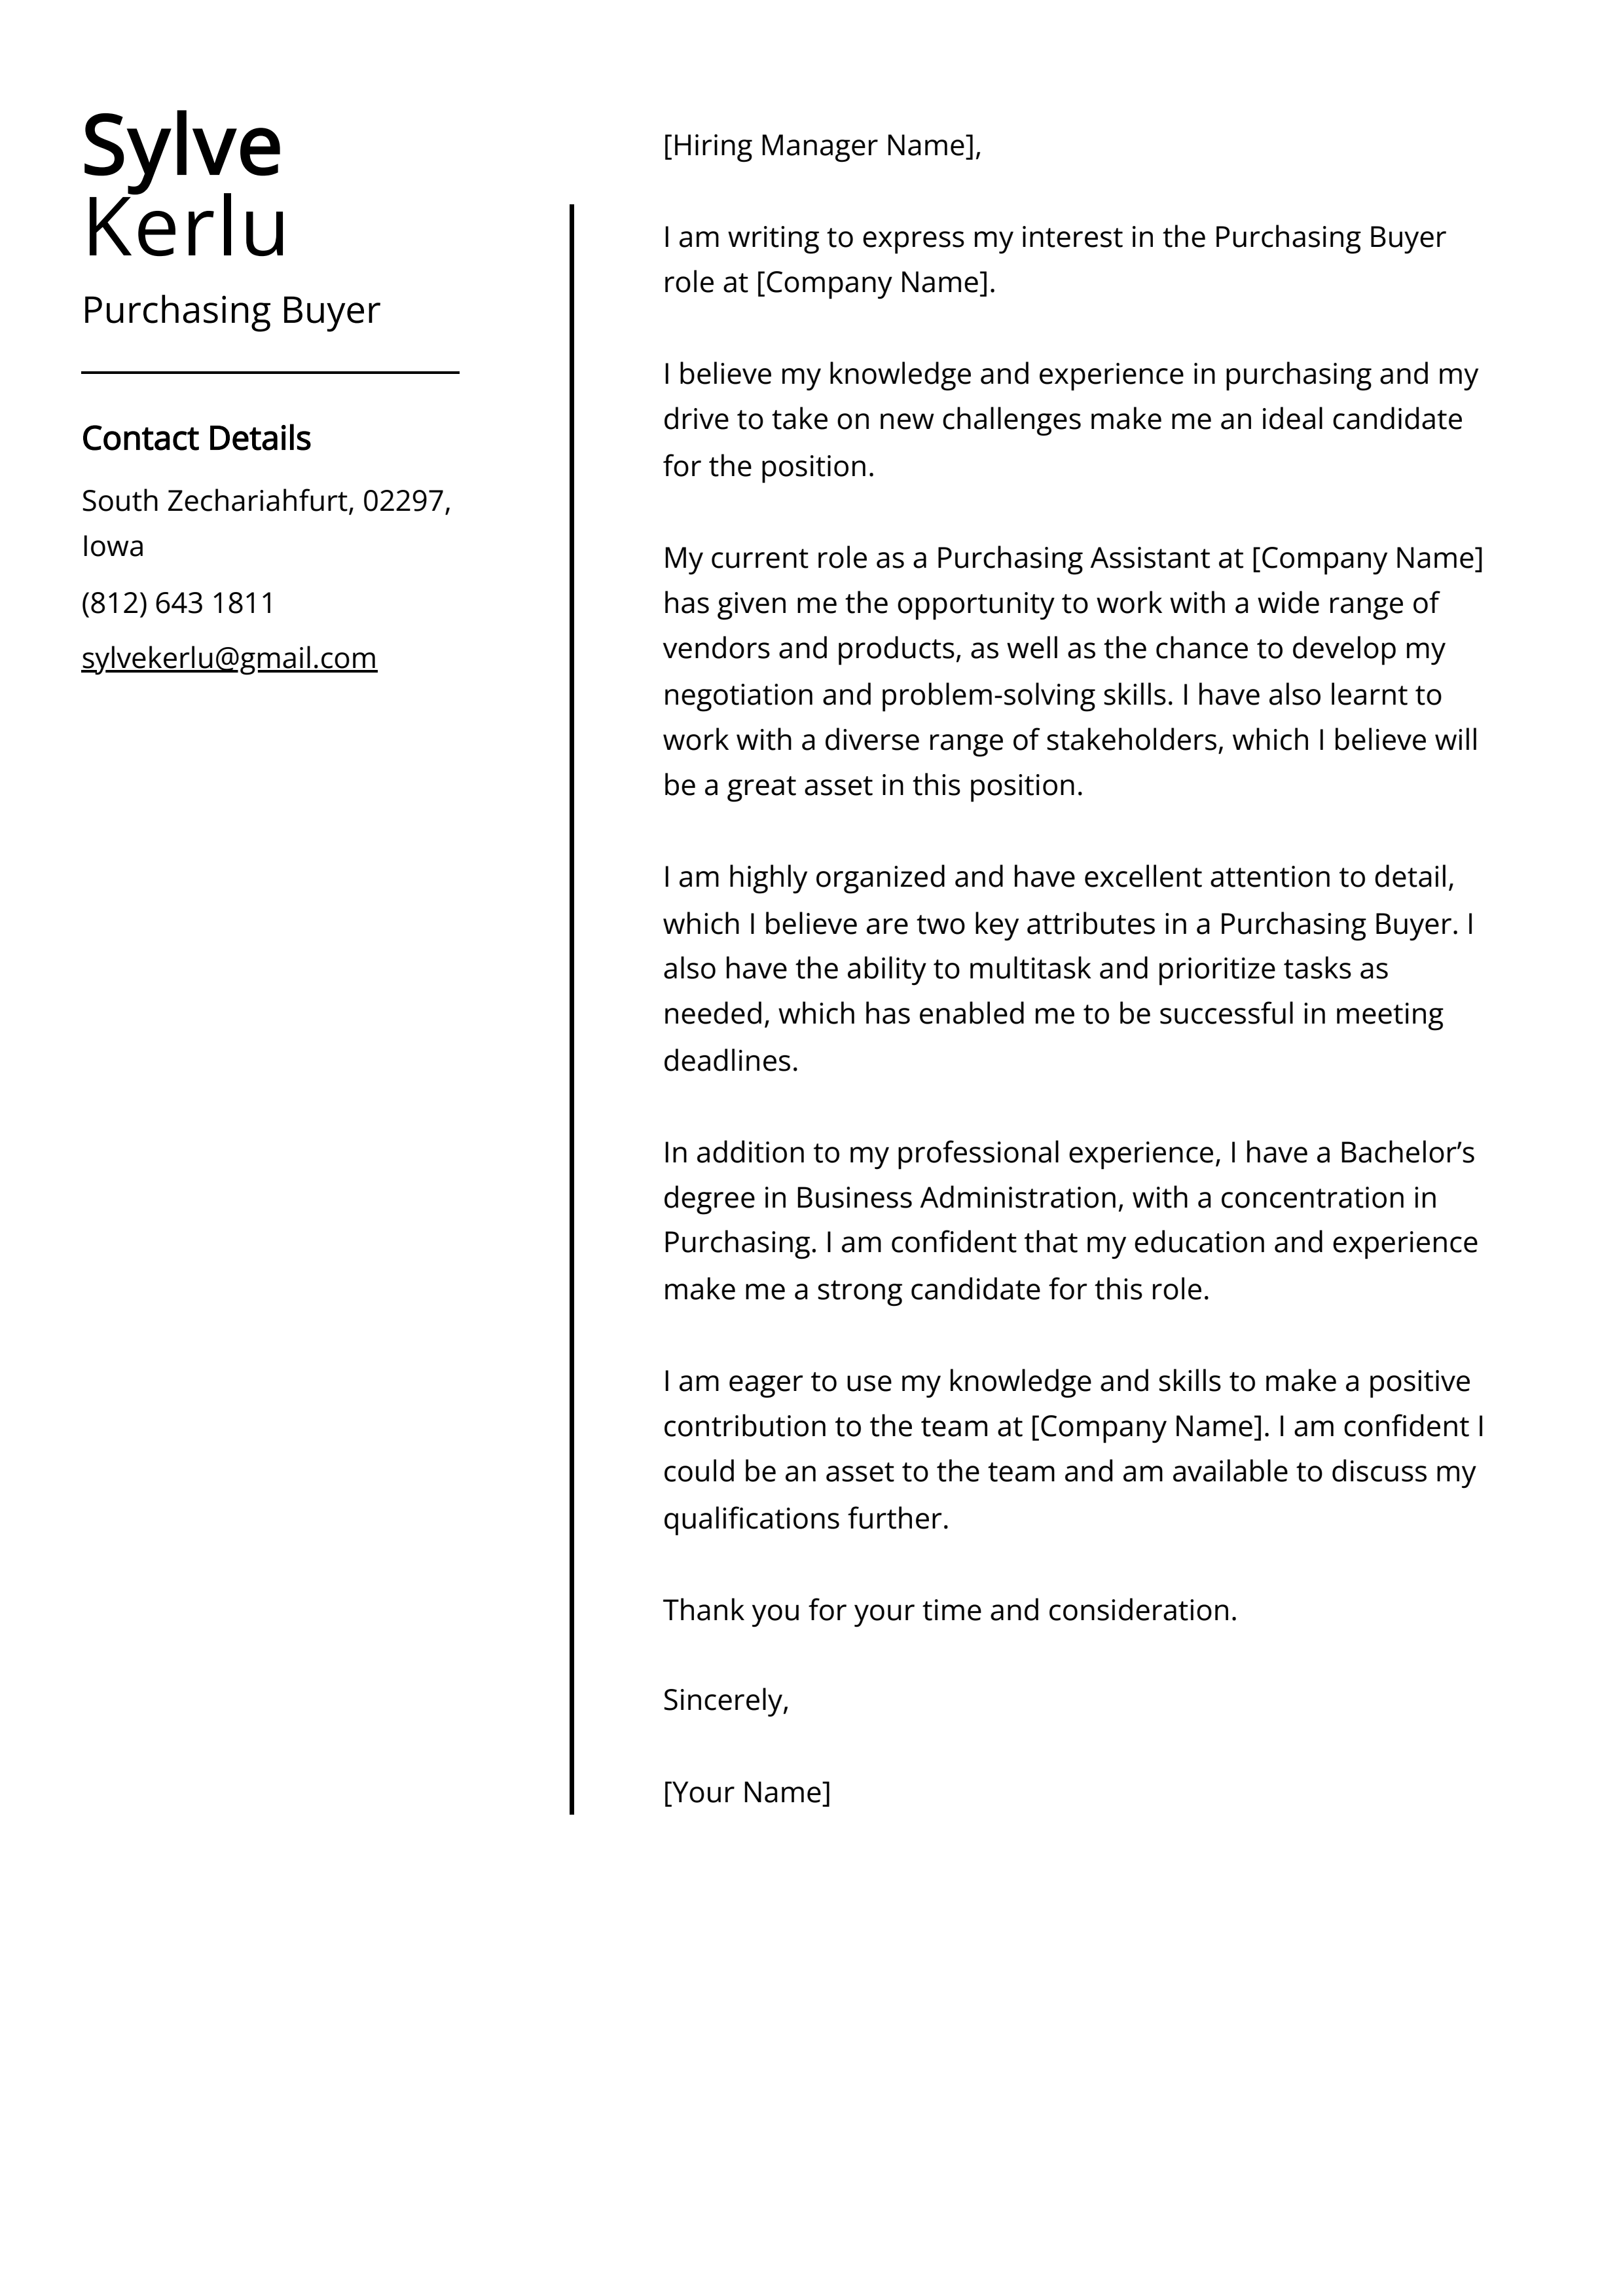 Purchasing Buyer Cover Letter Example